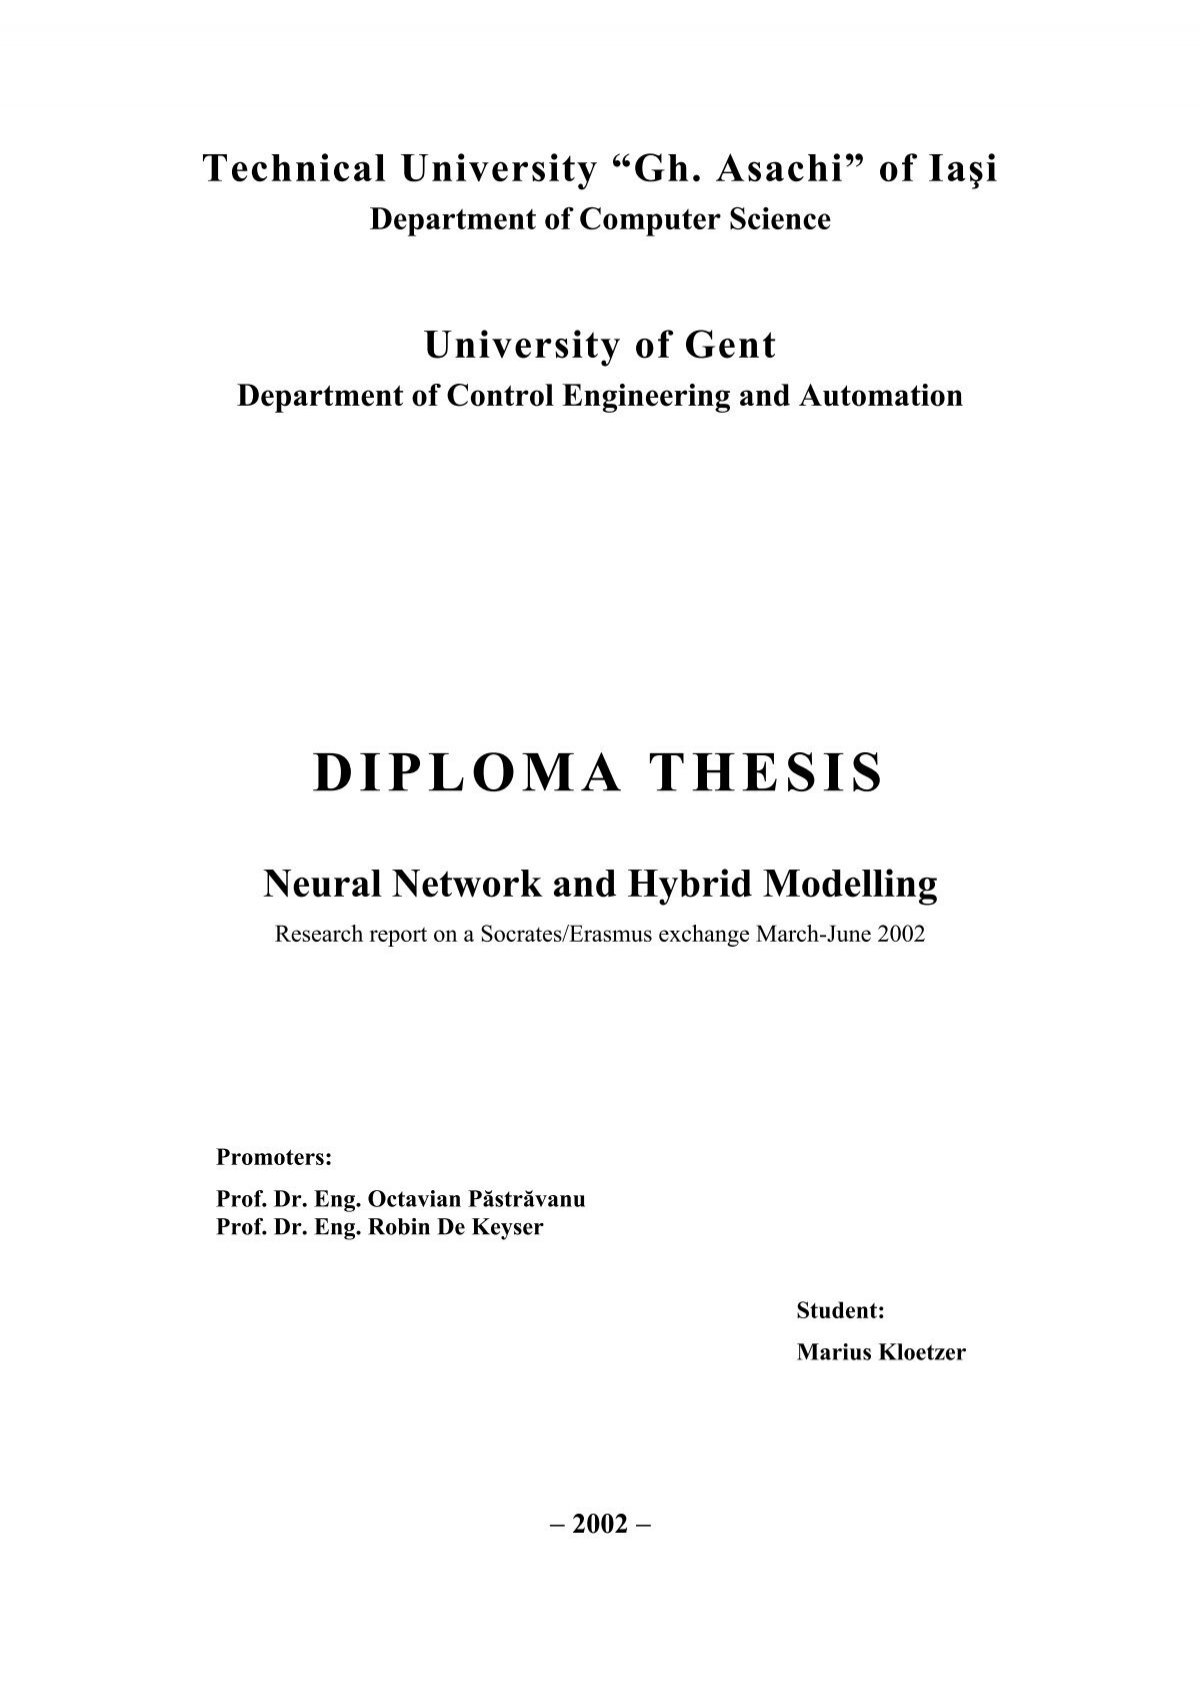 thesis of the diploma